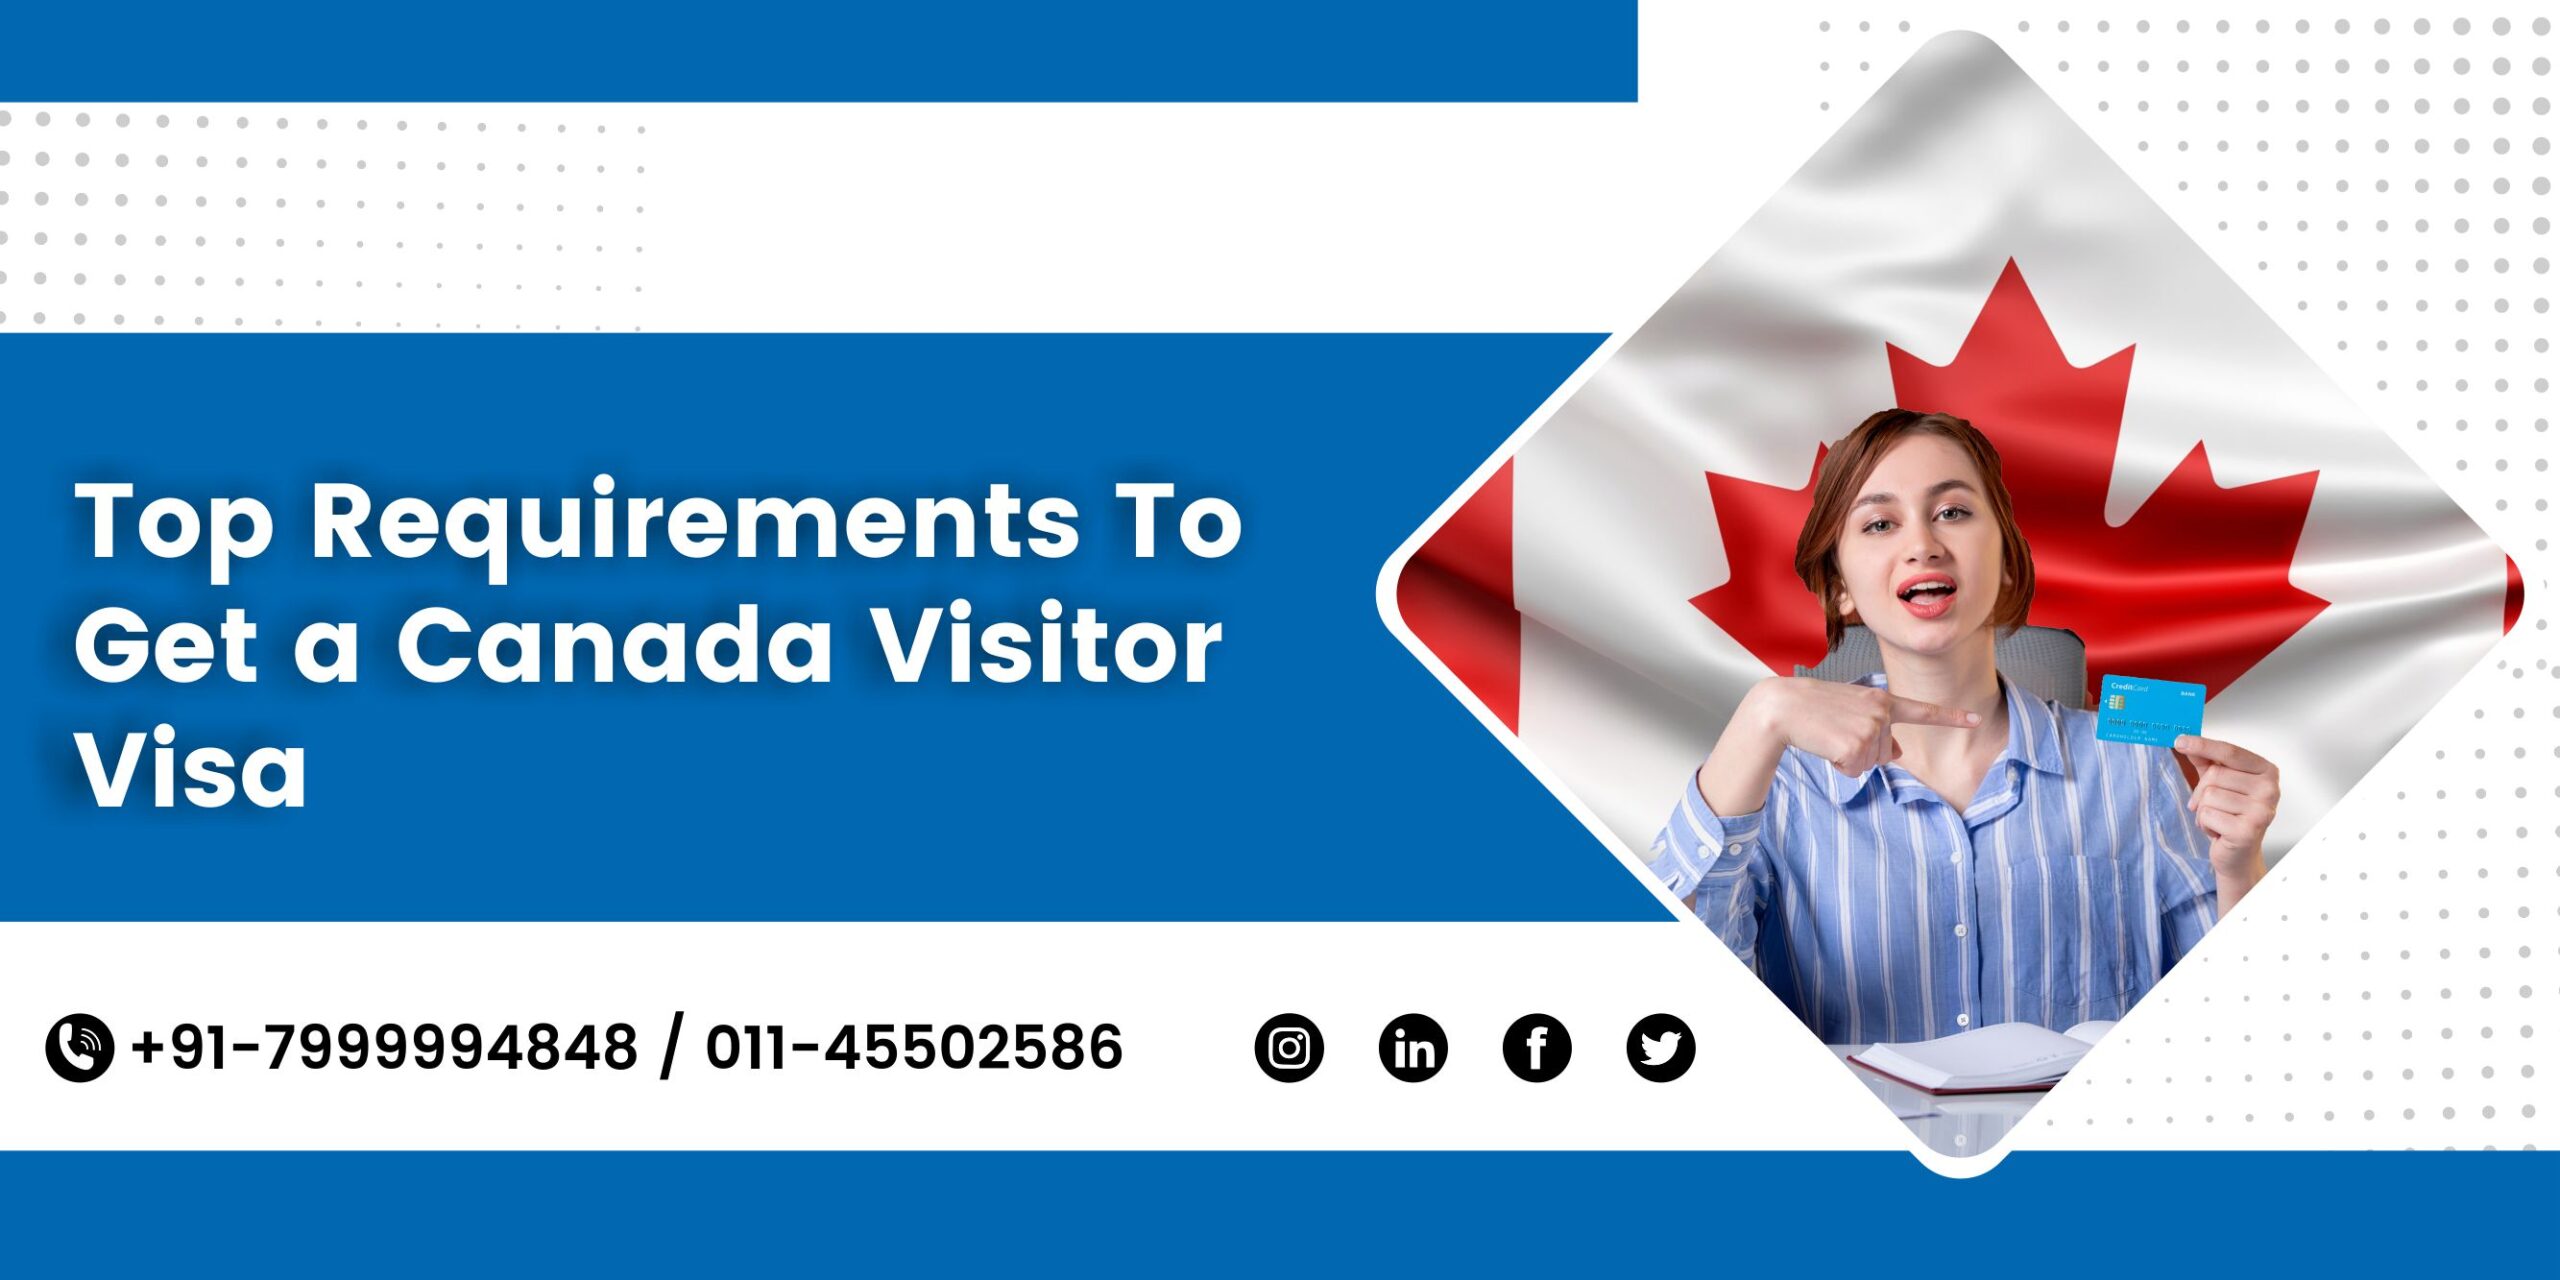 Top Requirements To Get a Canada Visitor Visa